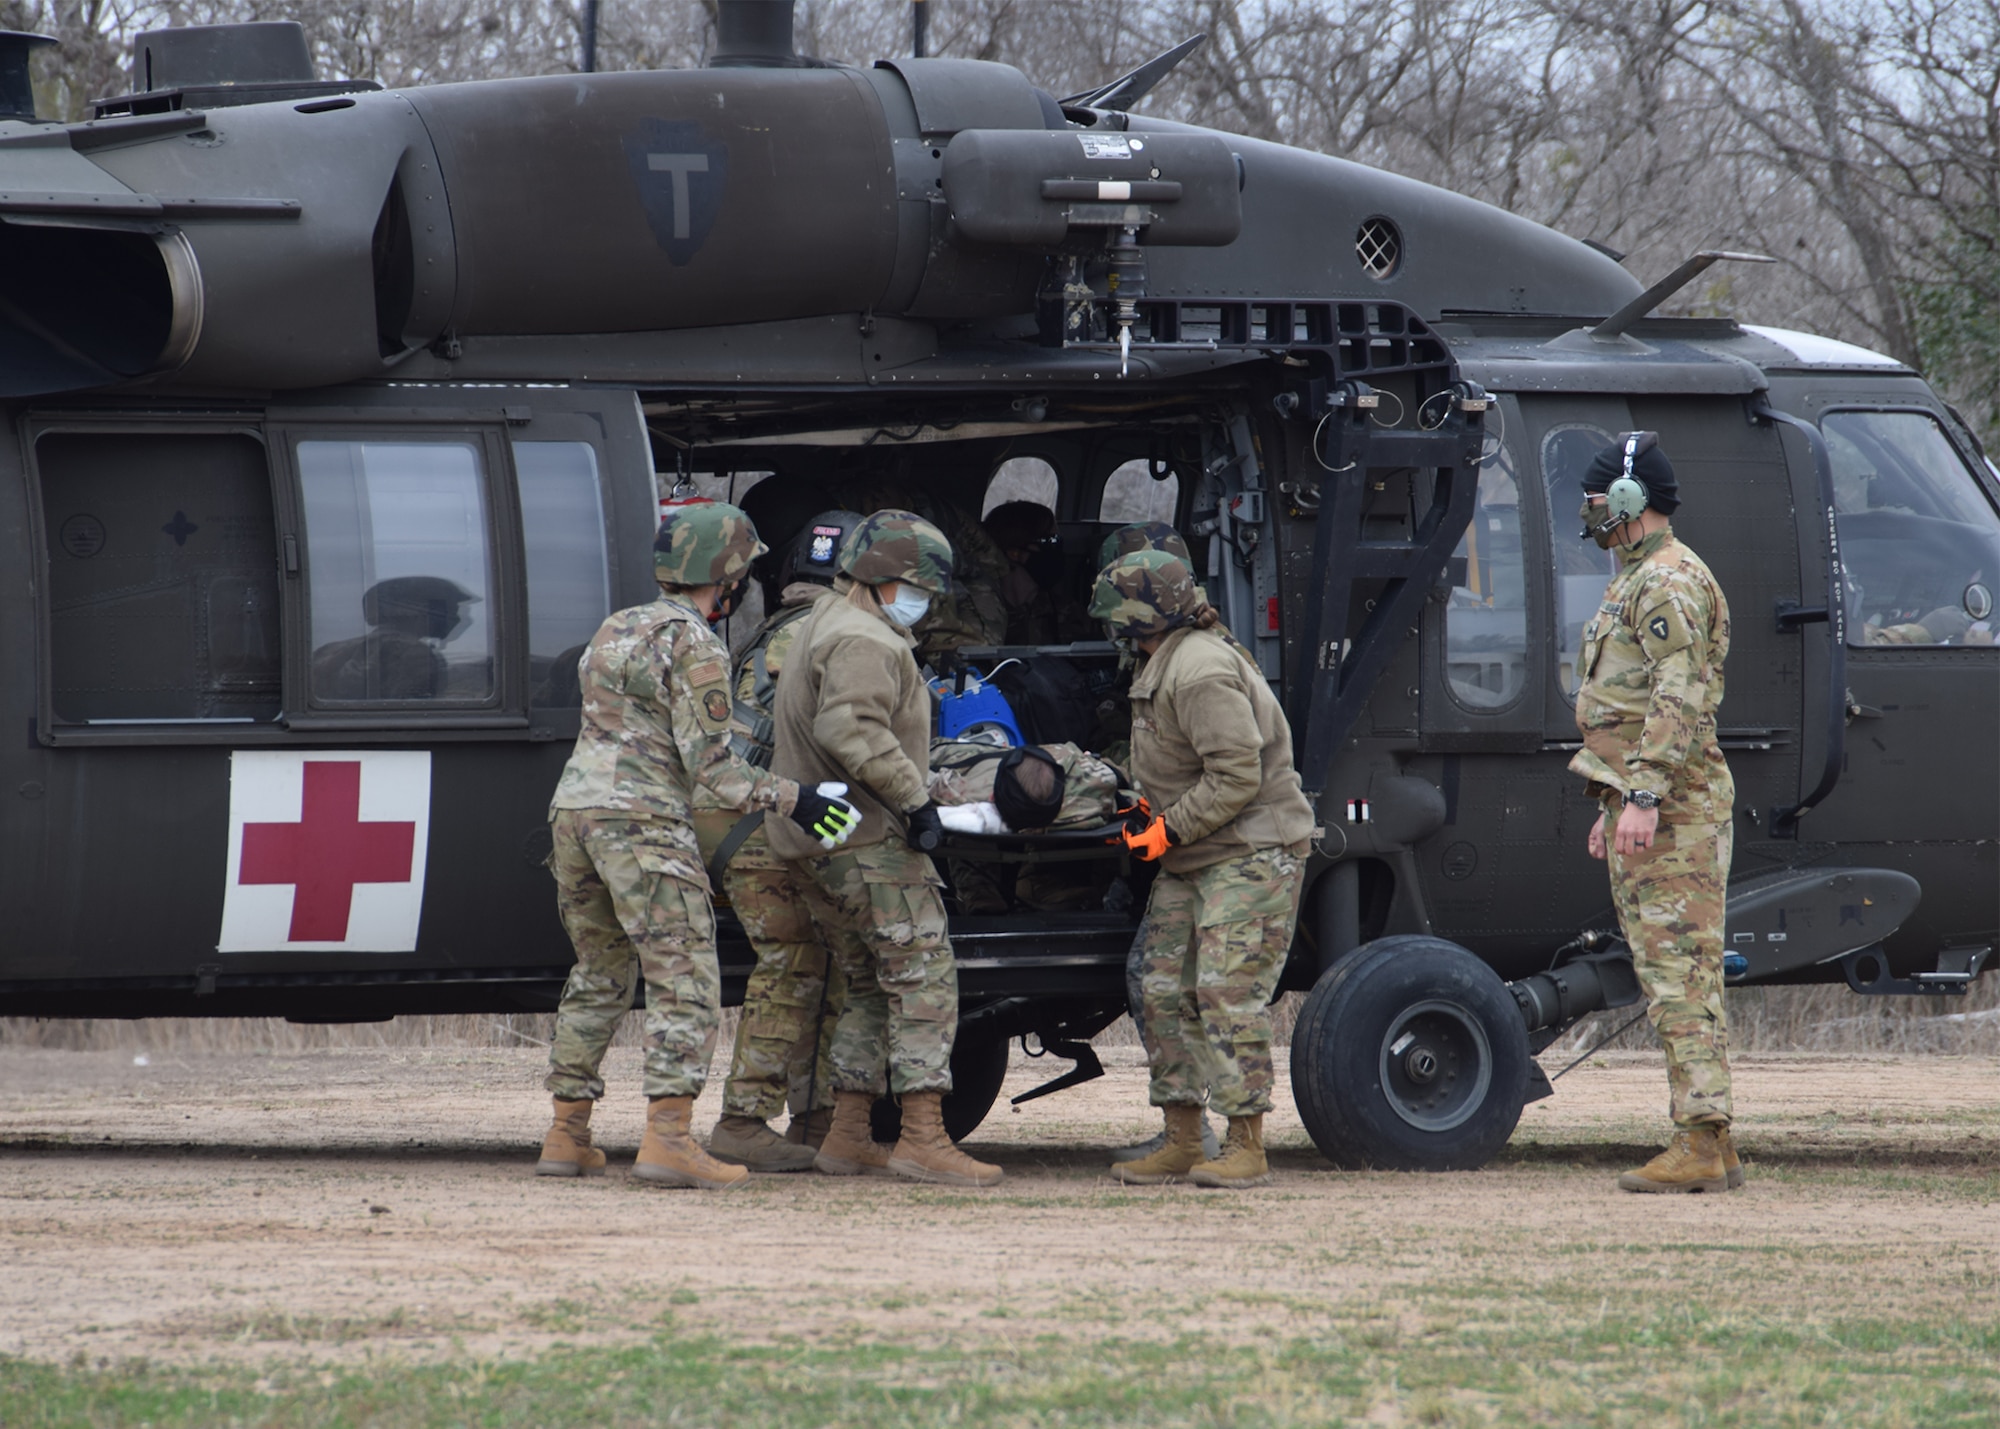 Reserve Citizen Airmen from the 433rd Aeromedical Staging Squadron conduct training in offloading and receiving incoming patients on a UH-60 Black Hawk helicopter Jan. 9, 2021 at Joint Base San Antonio-Chapman Training Annex. The training opportunity provided first time experience to personnel working on the ground. (U.S. Air Force photo by Tech. Sgt. Iram Carmona)